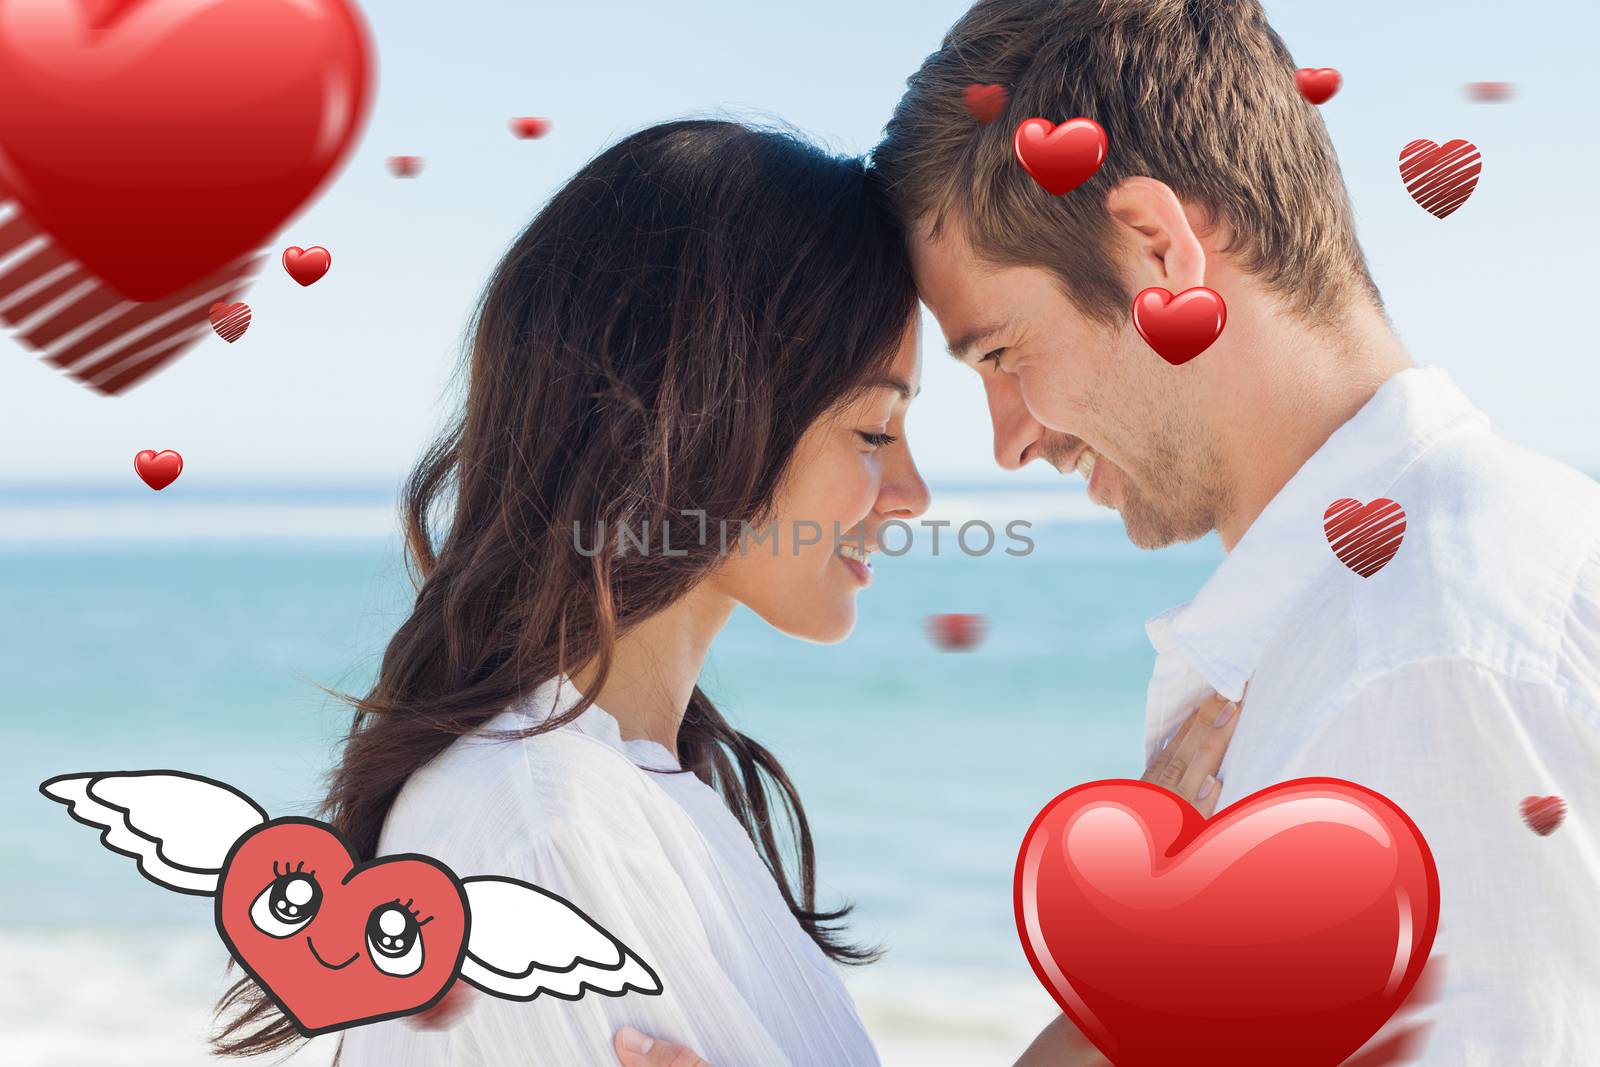 Romantic couple relaxing and embracing on the beach  against heart with wings